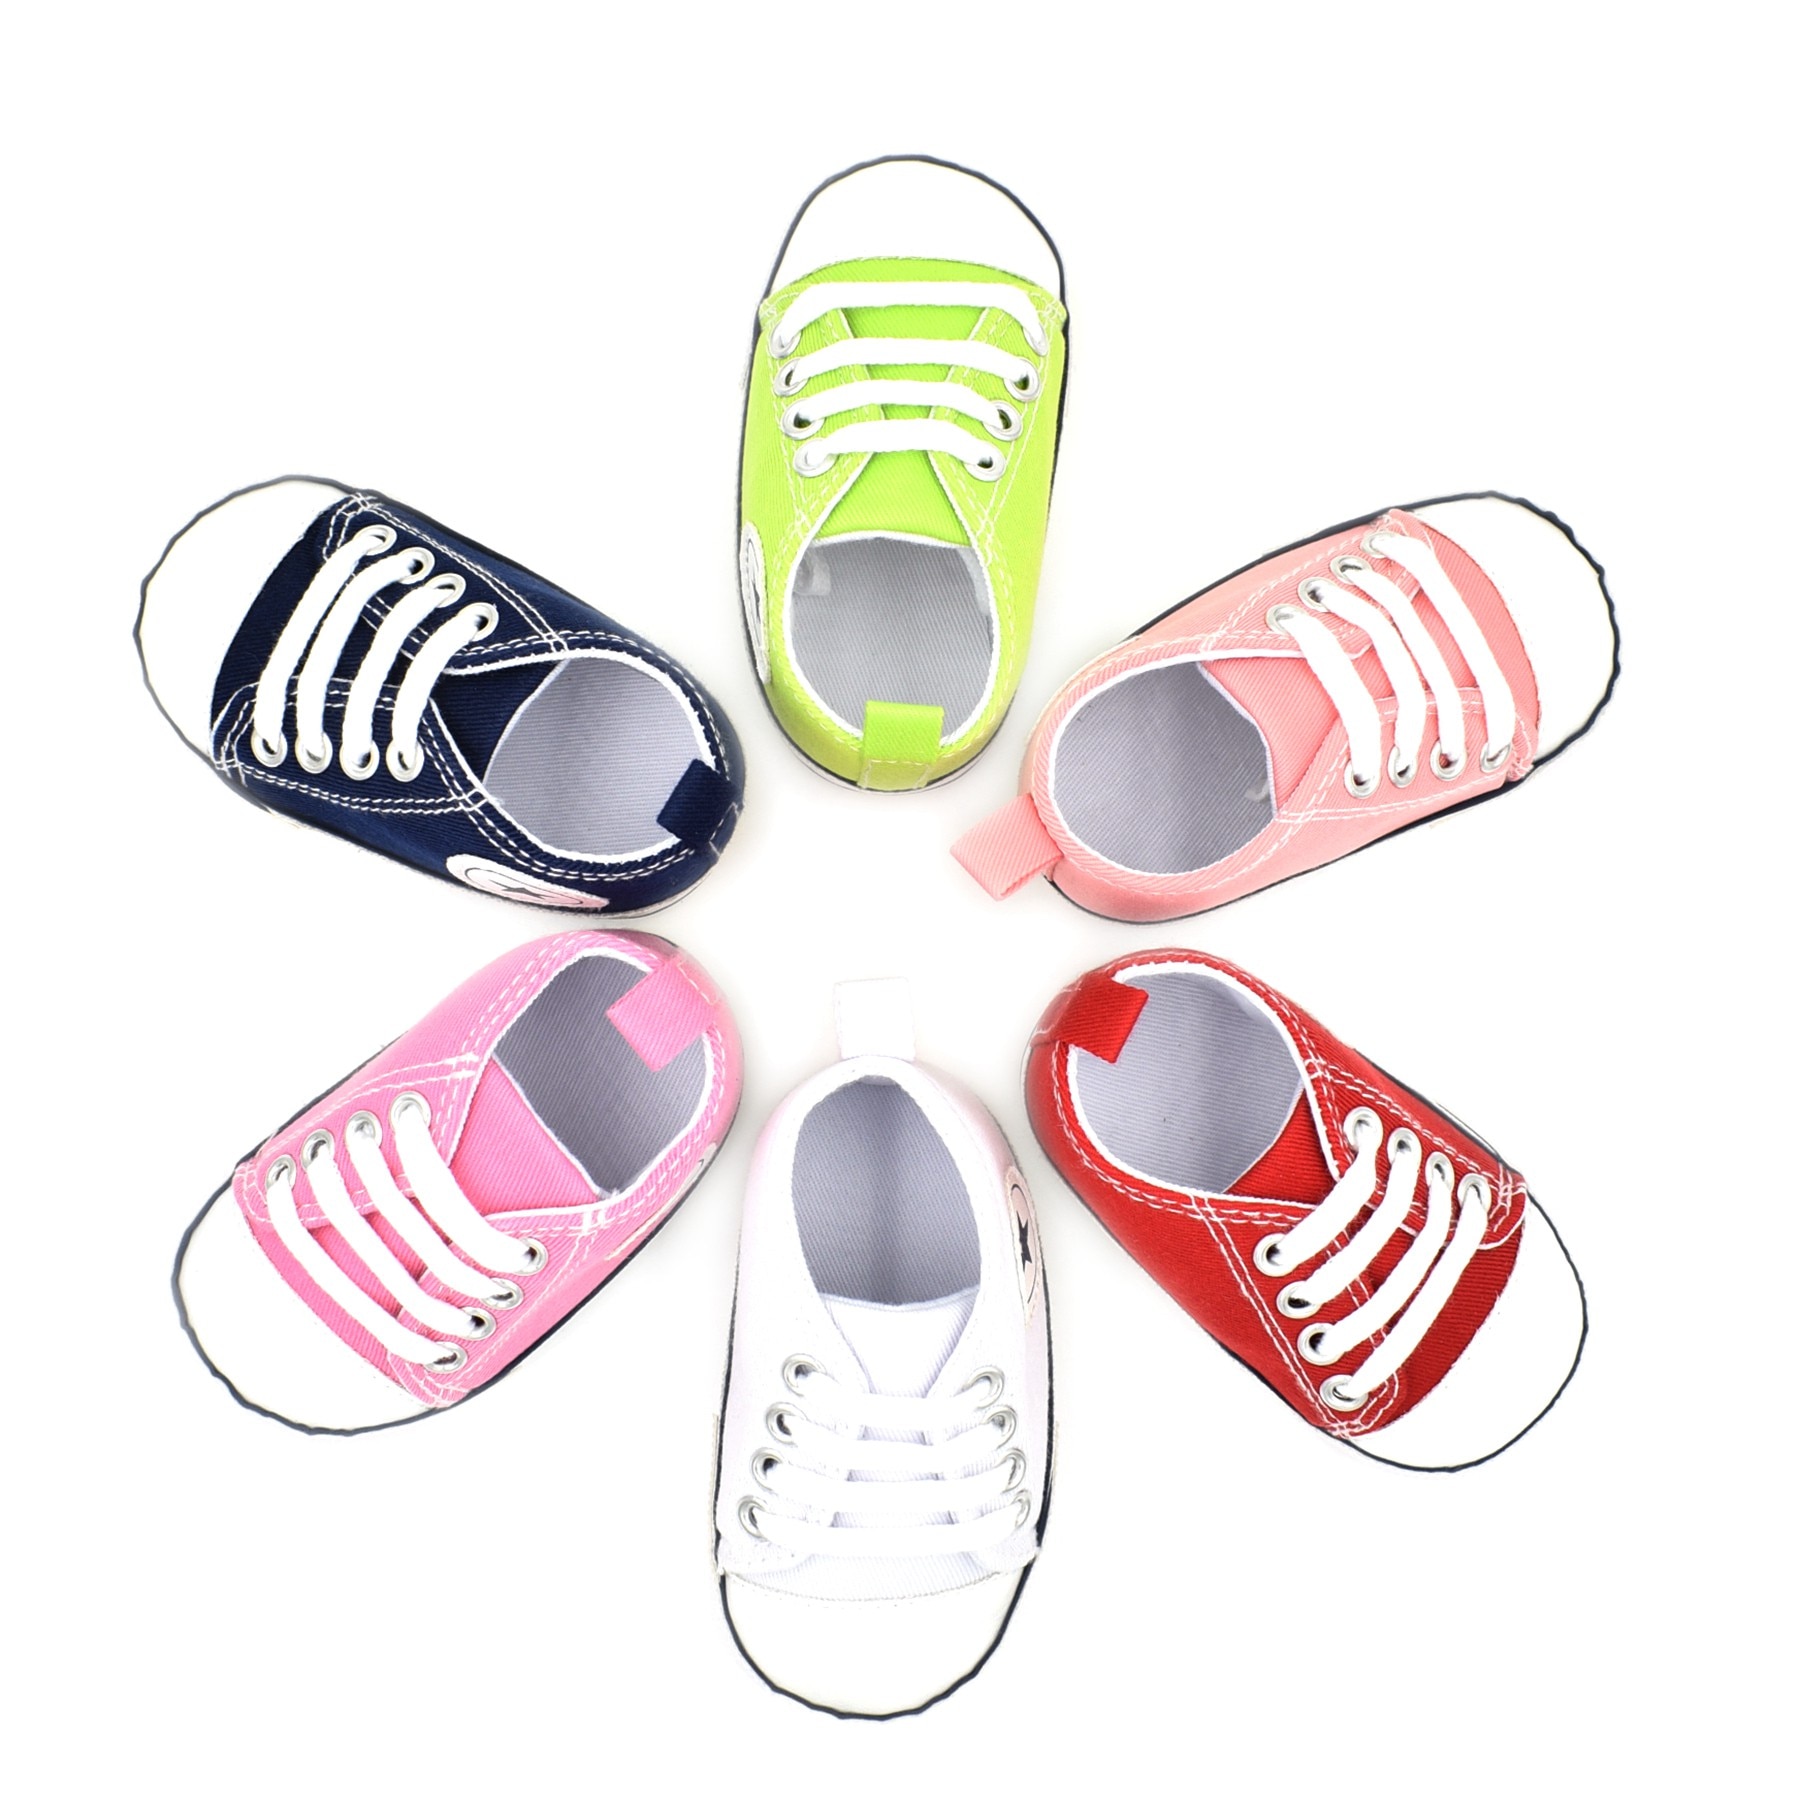 Baby's Casual Style Canvas Shoes